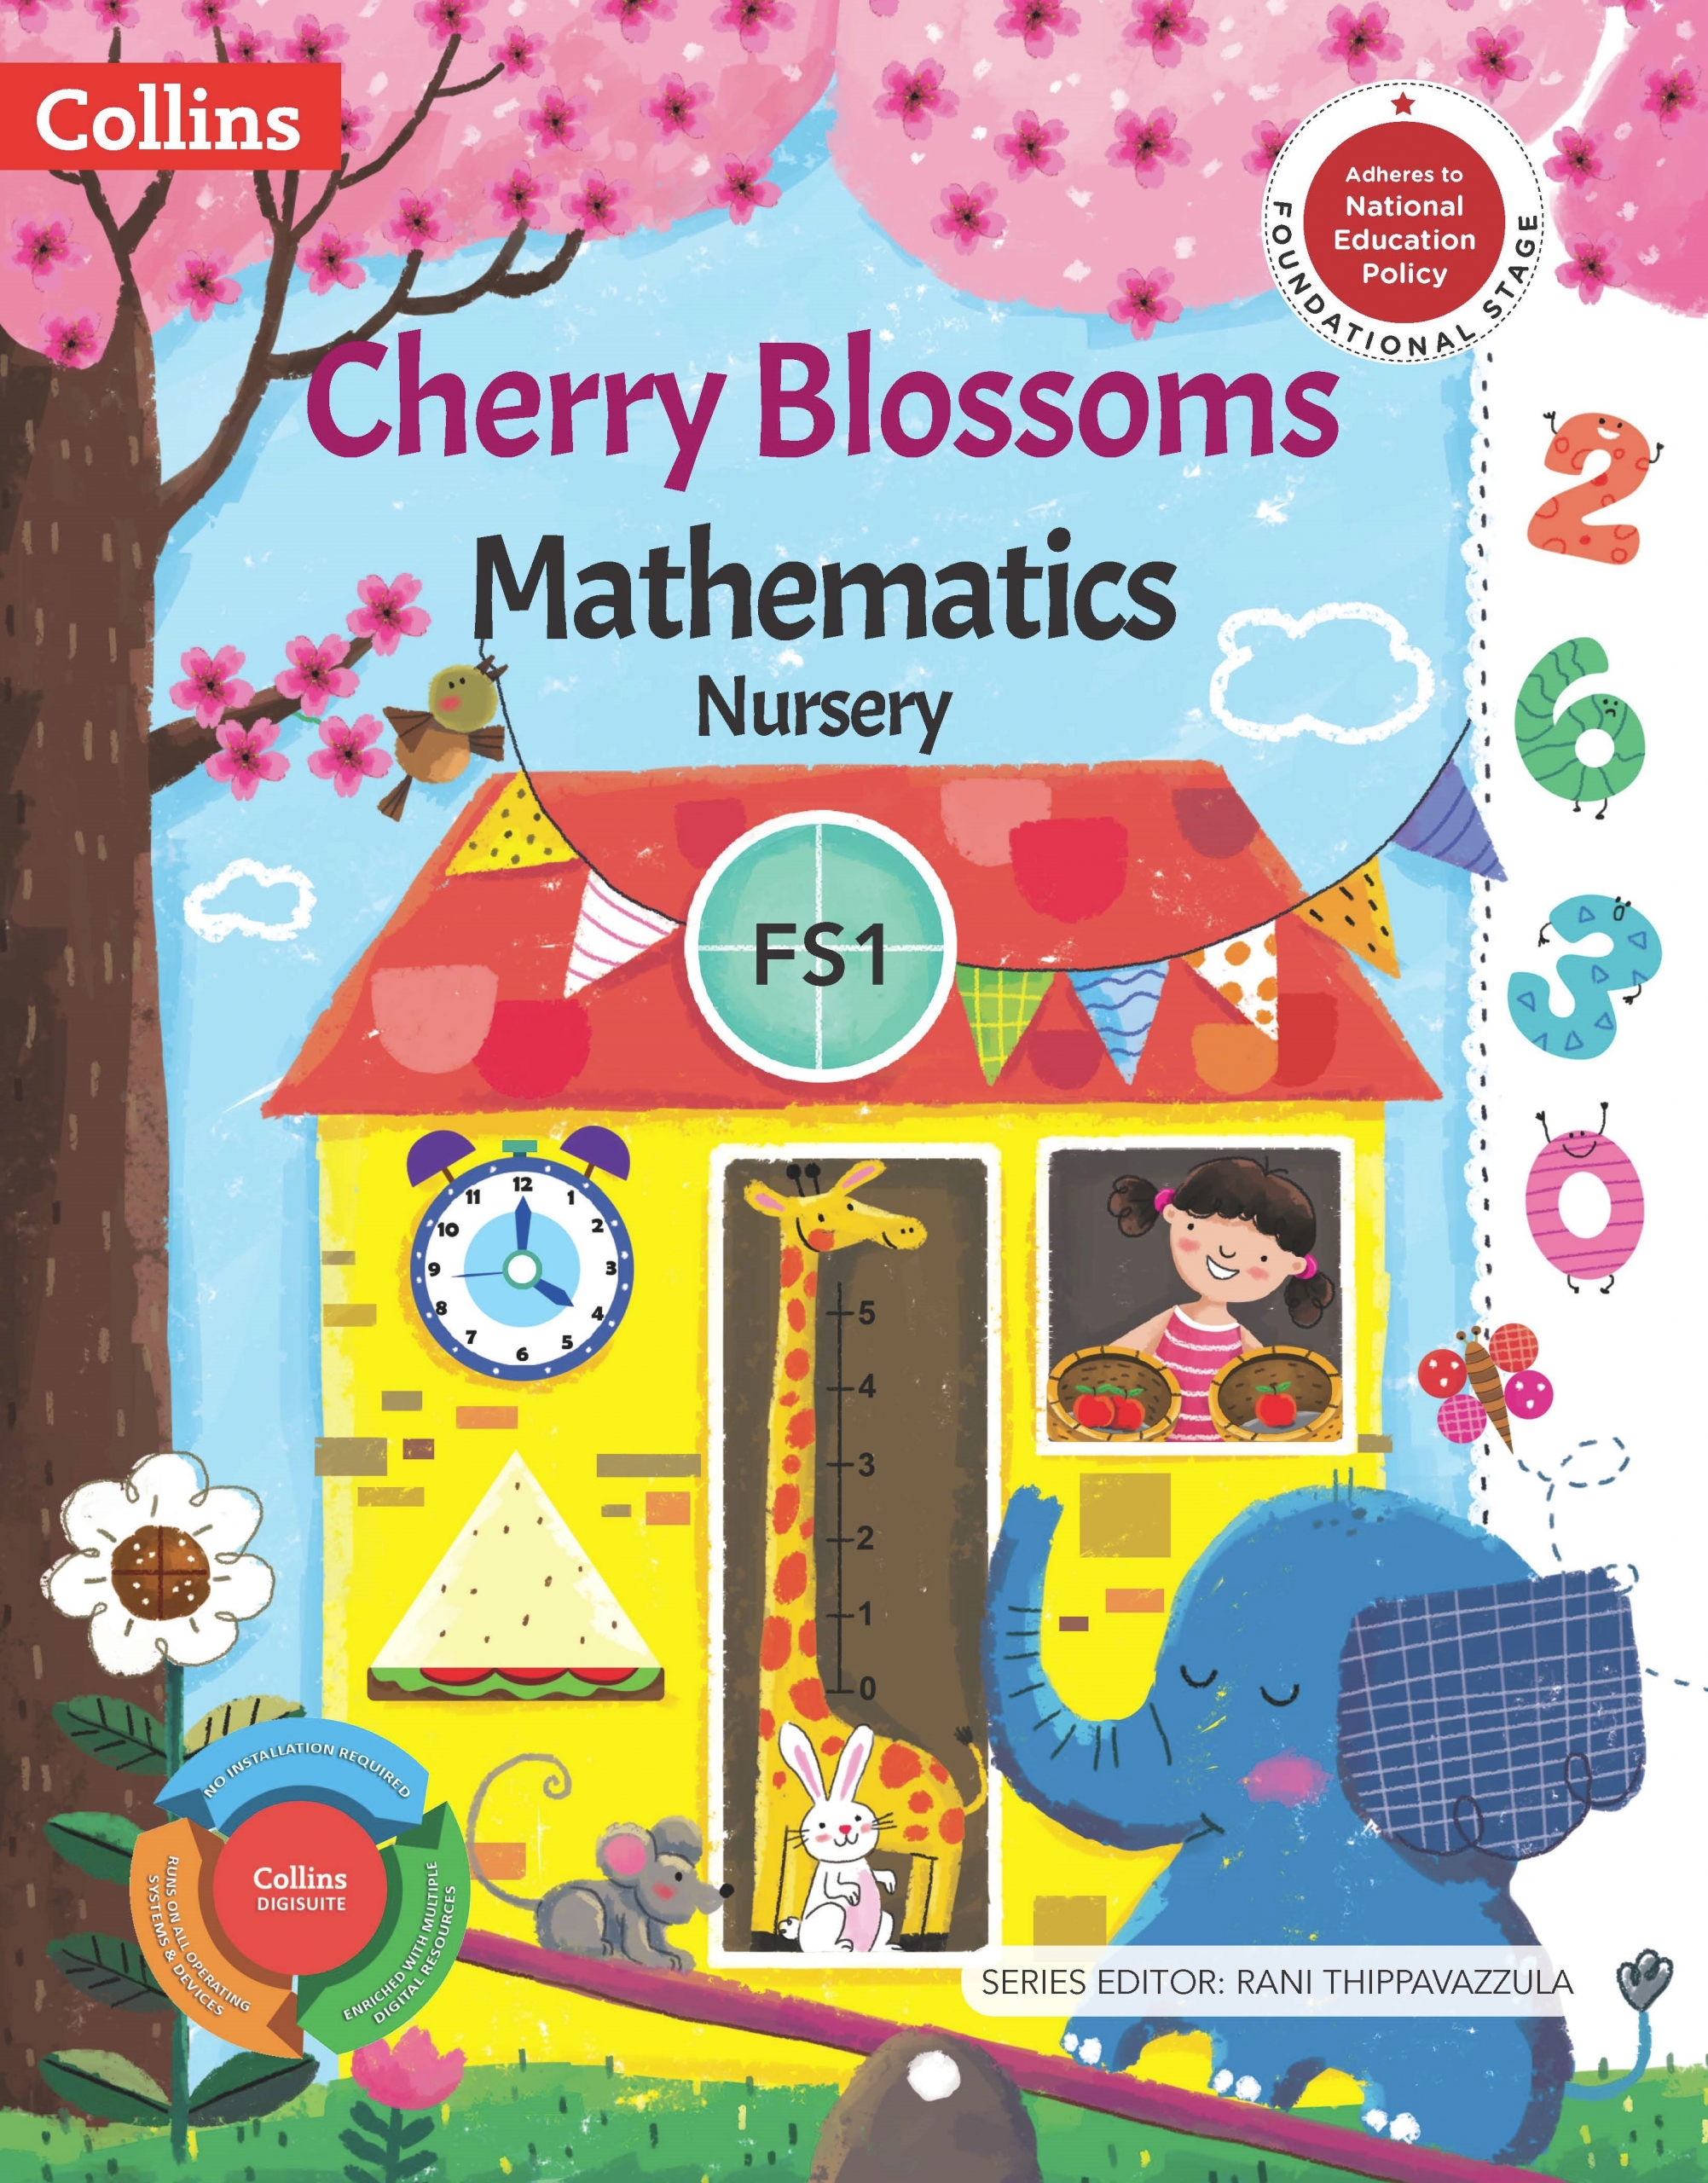 Cherry Blossoms Nursery Maths scaled